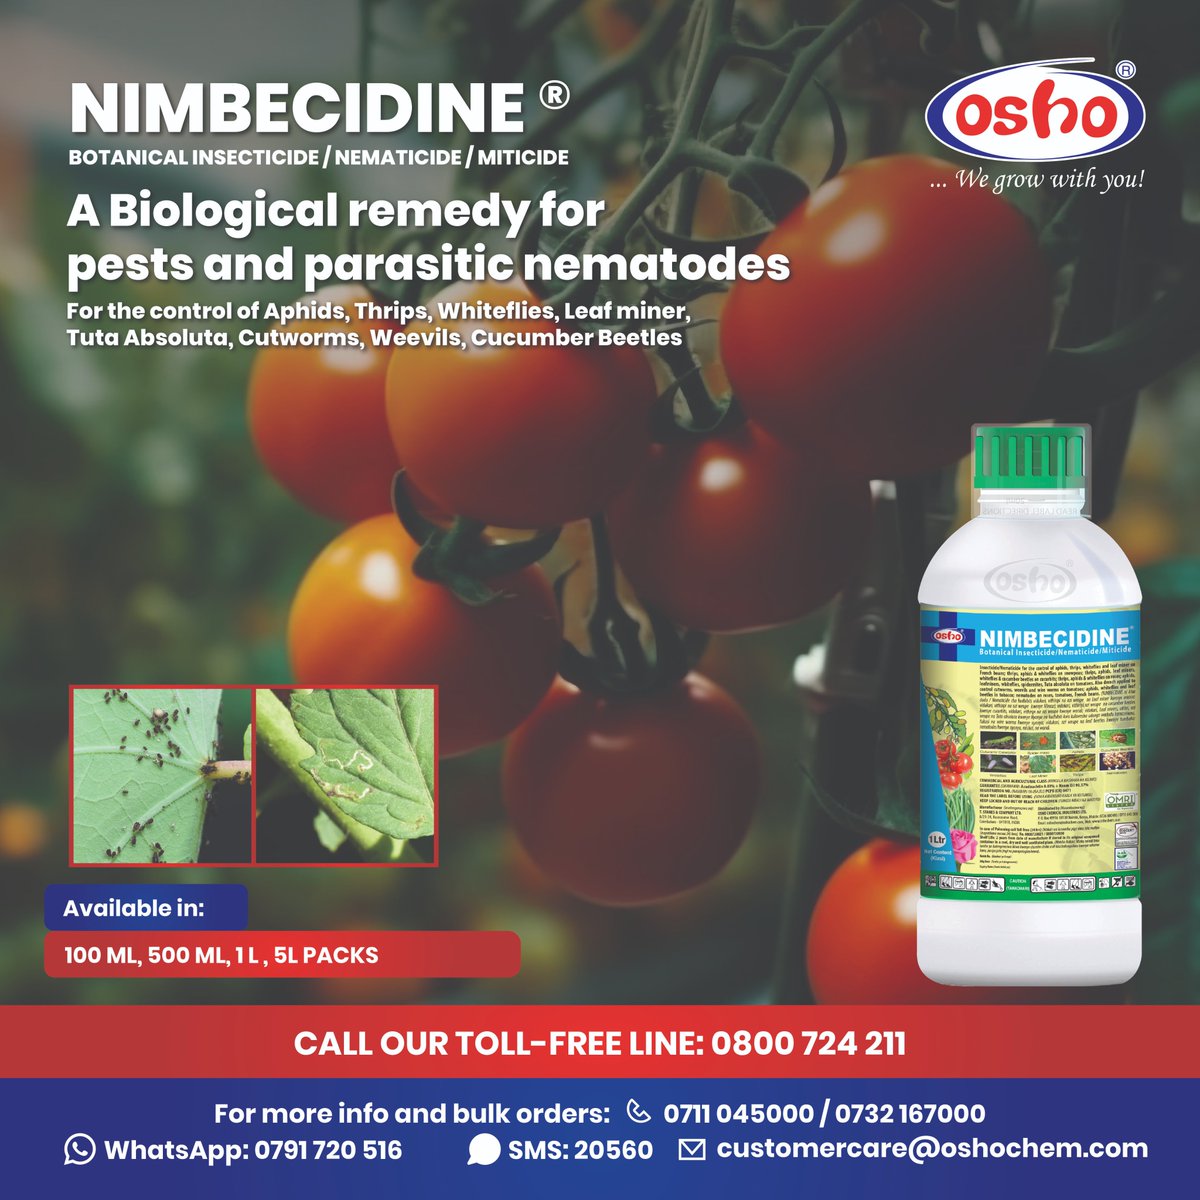 NIMBECIDINE is a biological remedy used to combat Aphids, Thrips, Whiteflies, Leaf miner,​ Tuta Absoluta, Cutworms, Weevils & Cucumber Beetles.​ Call us for free via: 0800724211 or call 0711 045 000 / 0732 167 000, SMS 20560 or on WhatsApp via 0791 720 516. #wegrowwithyou